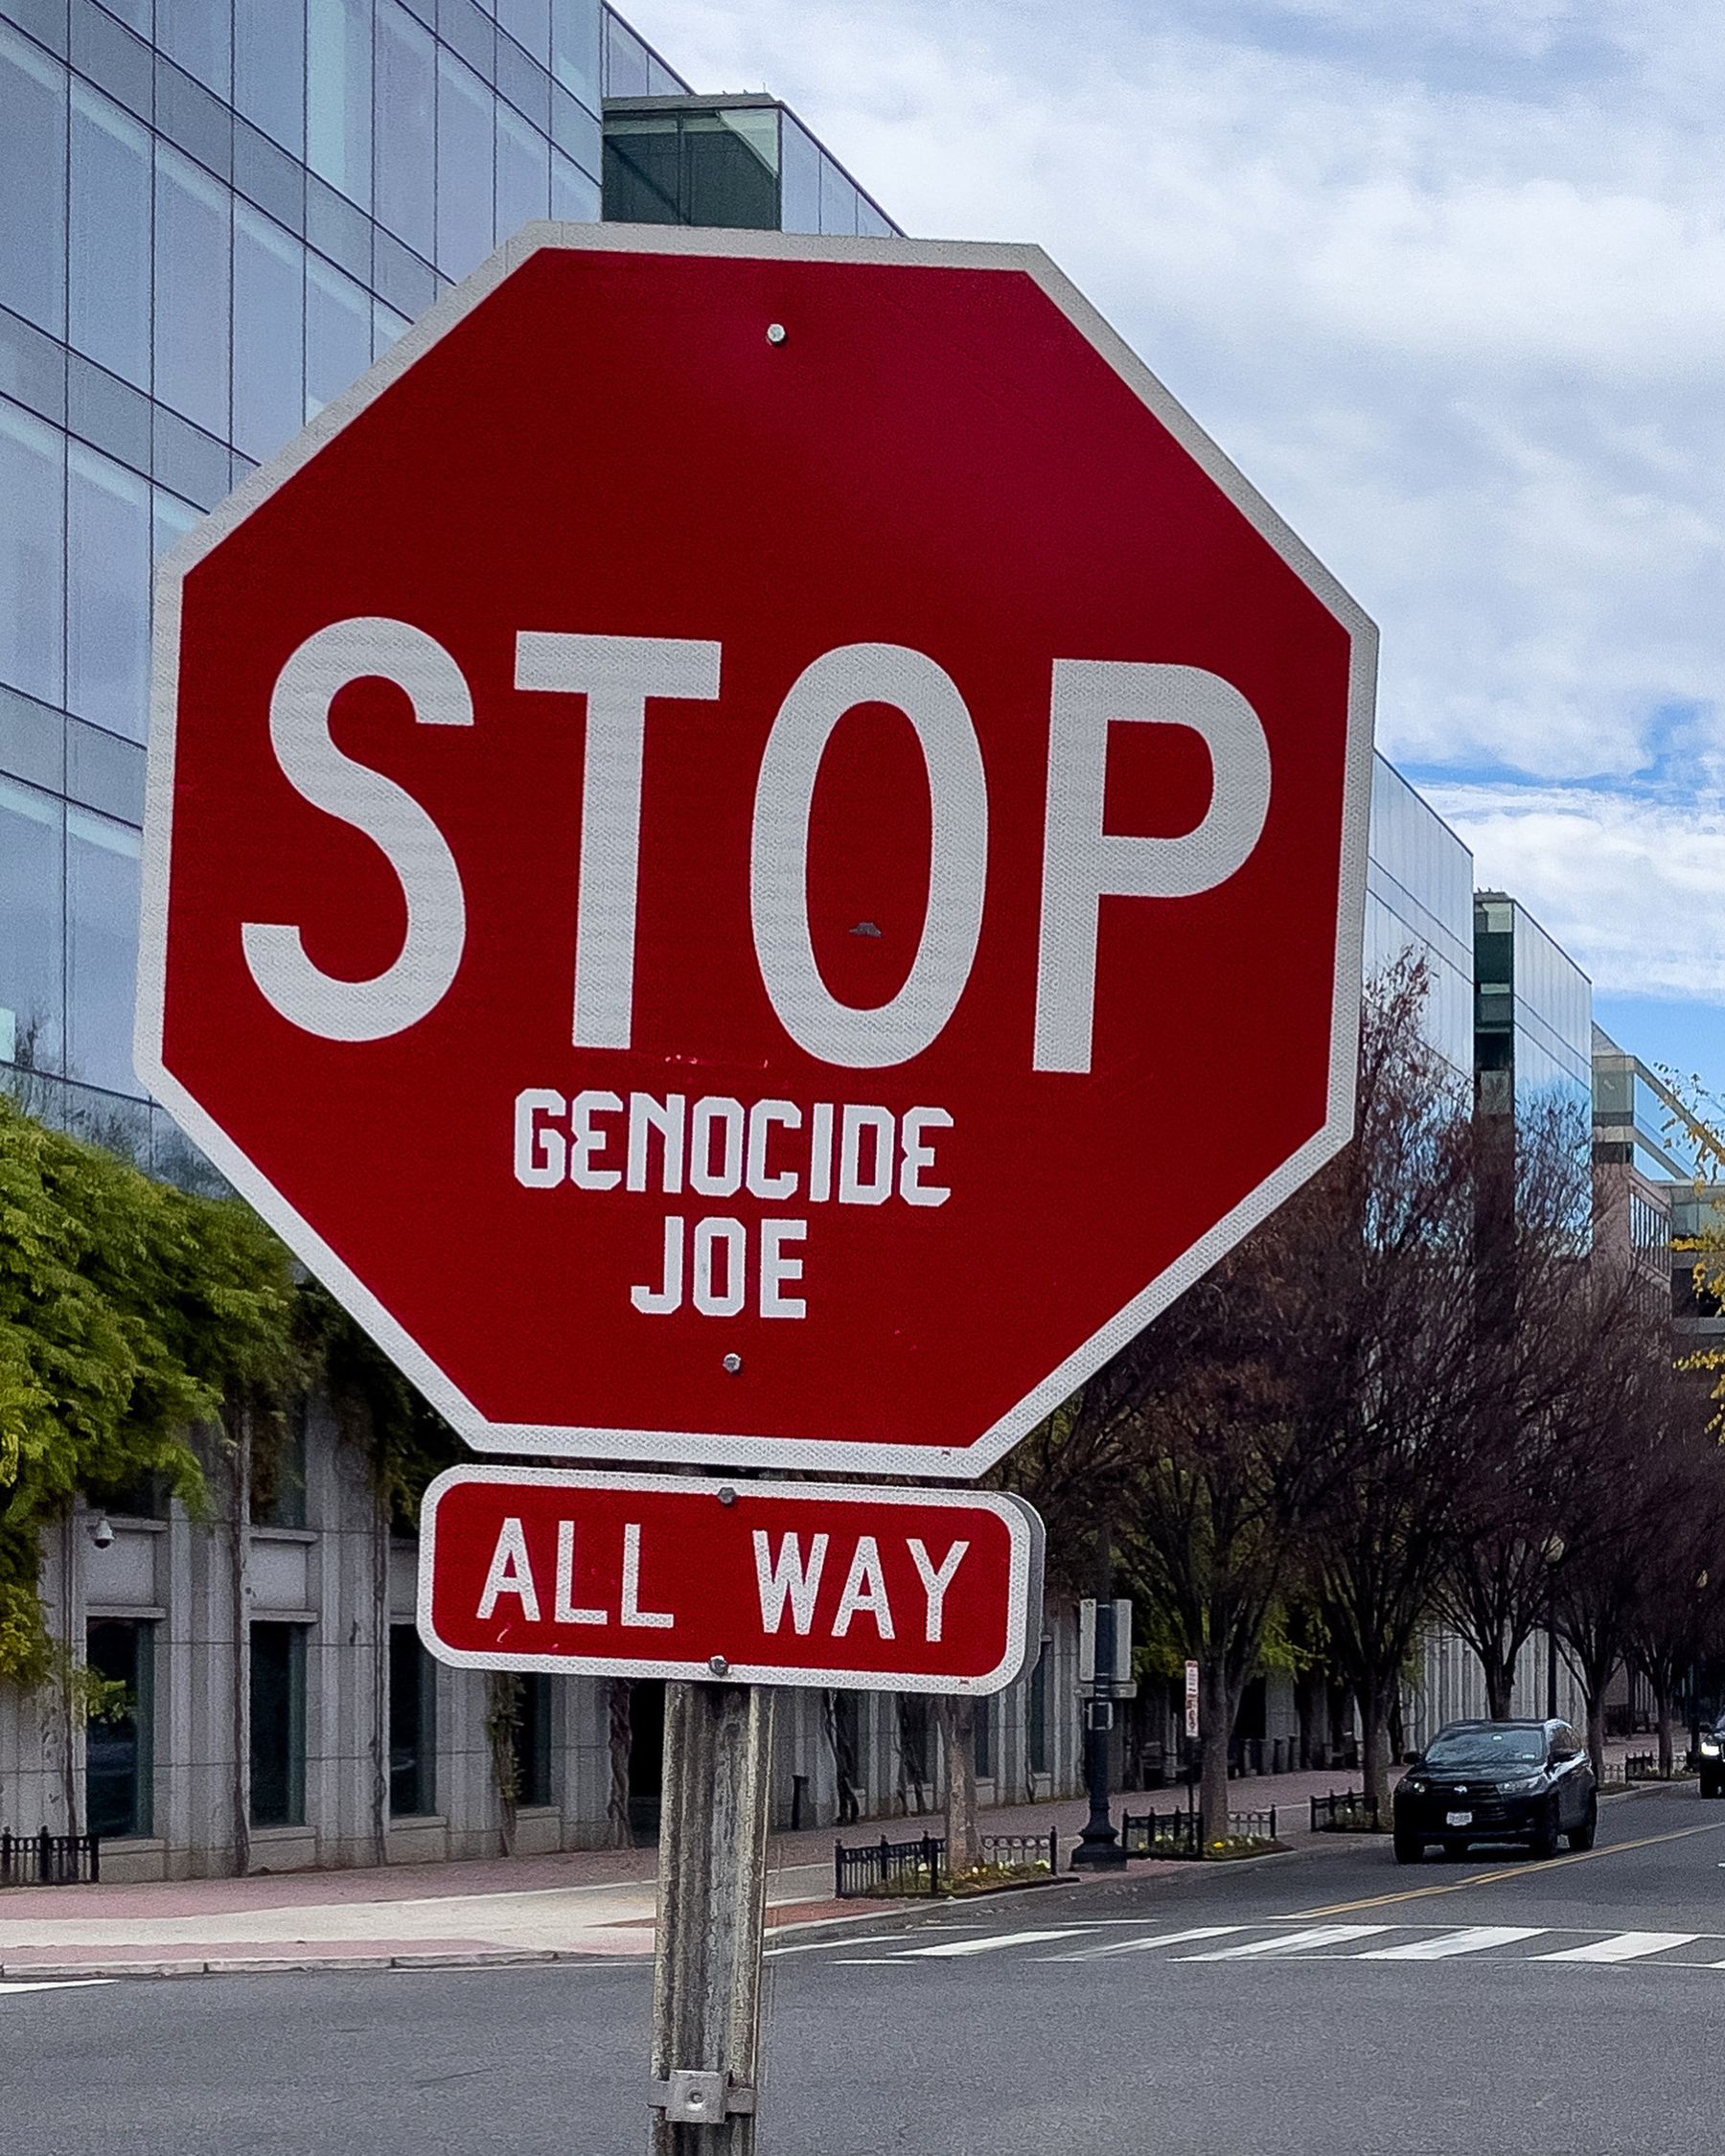 A photo of a stop sign, located in Capitol Hill, Washington, D.C., which is stenciled in a fashion  so that it reads “STOP GENOCIDE JOE”.